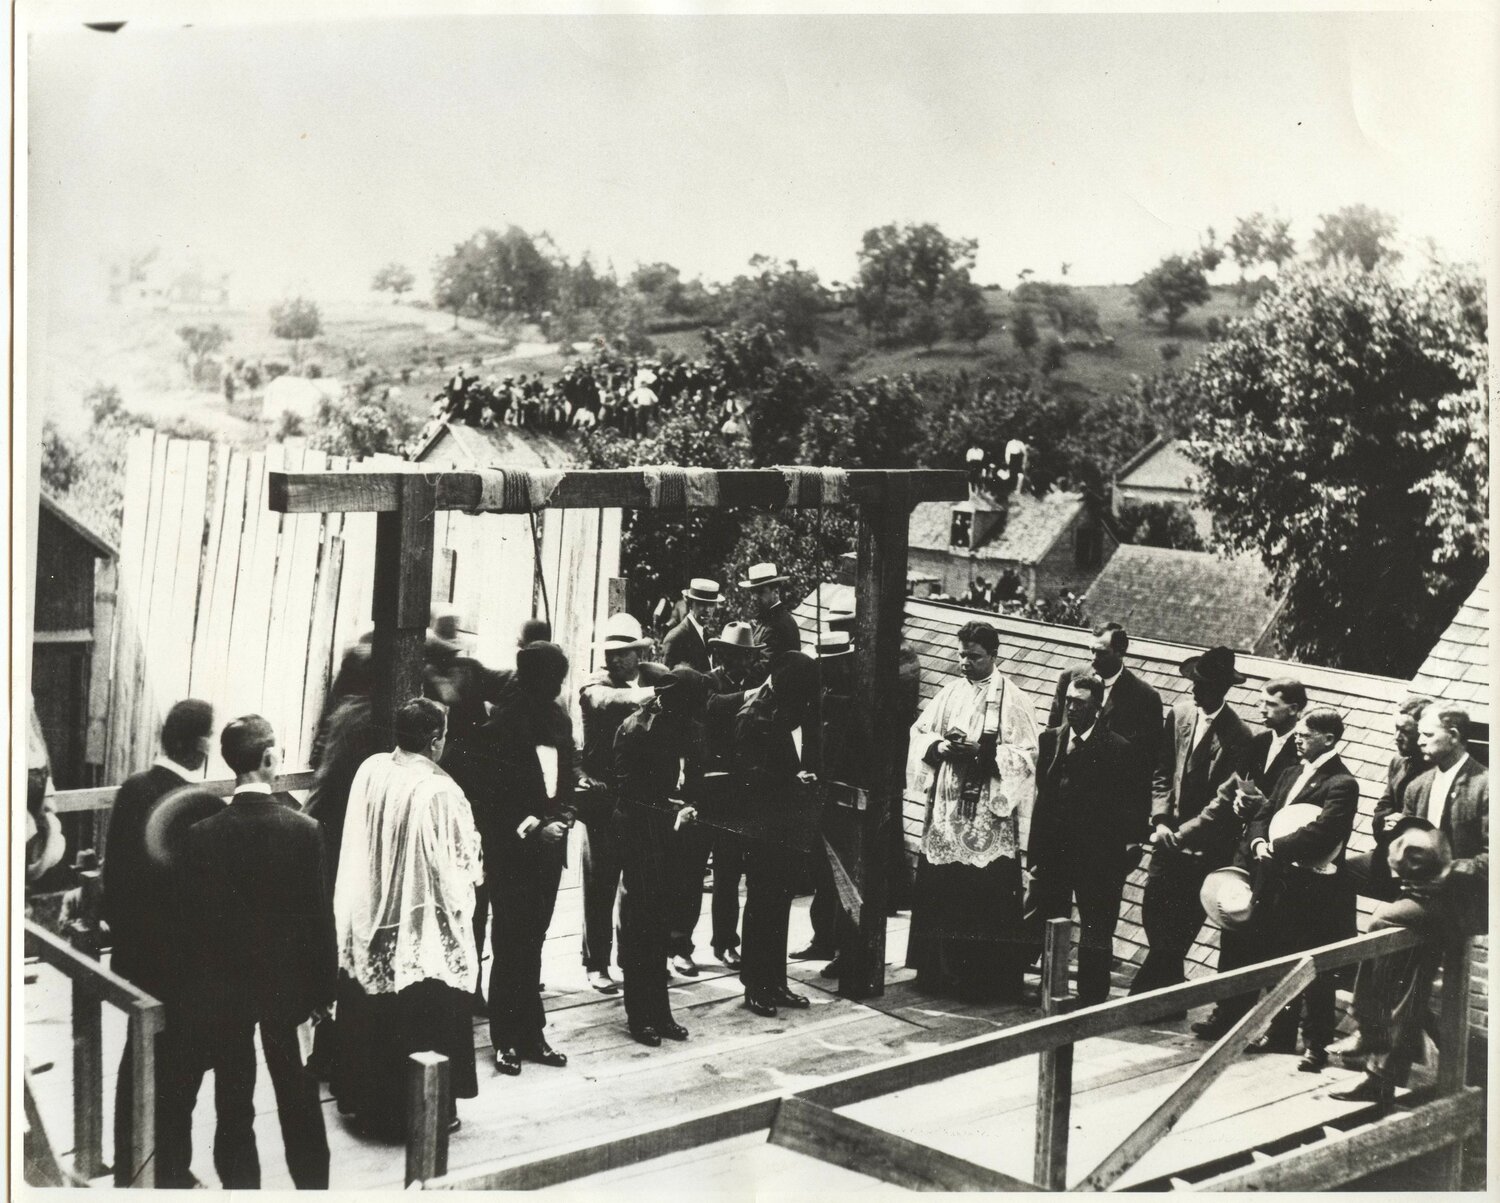 Father Henry Geisert, Catholic chaplain at the Missouri State Penitentiary and associate pastor of St. Peter Parish in Jefferson City, and Father Joseph Selinger, pastor, accompany three men who were condemned to die by hanging in their last moments on June 27, 1907.